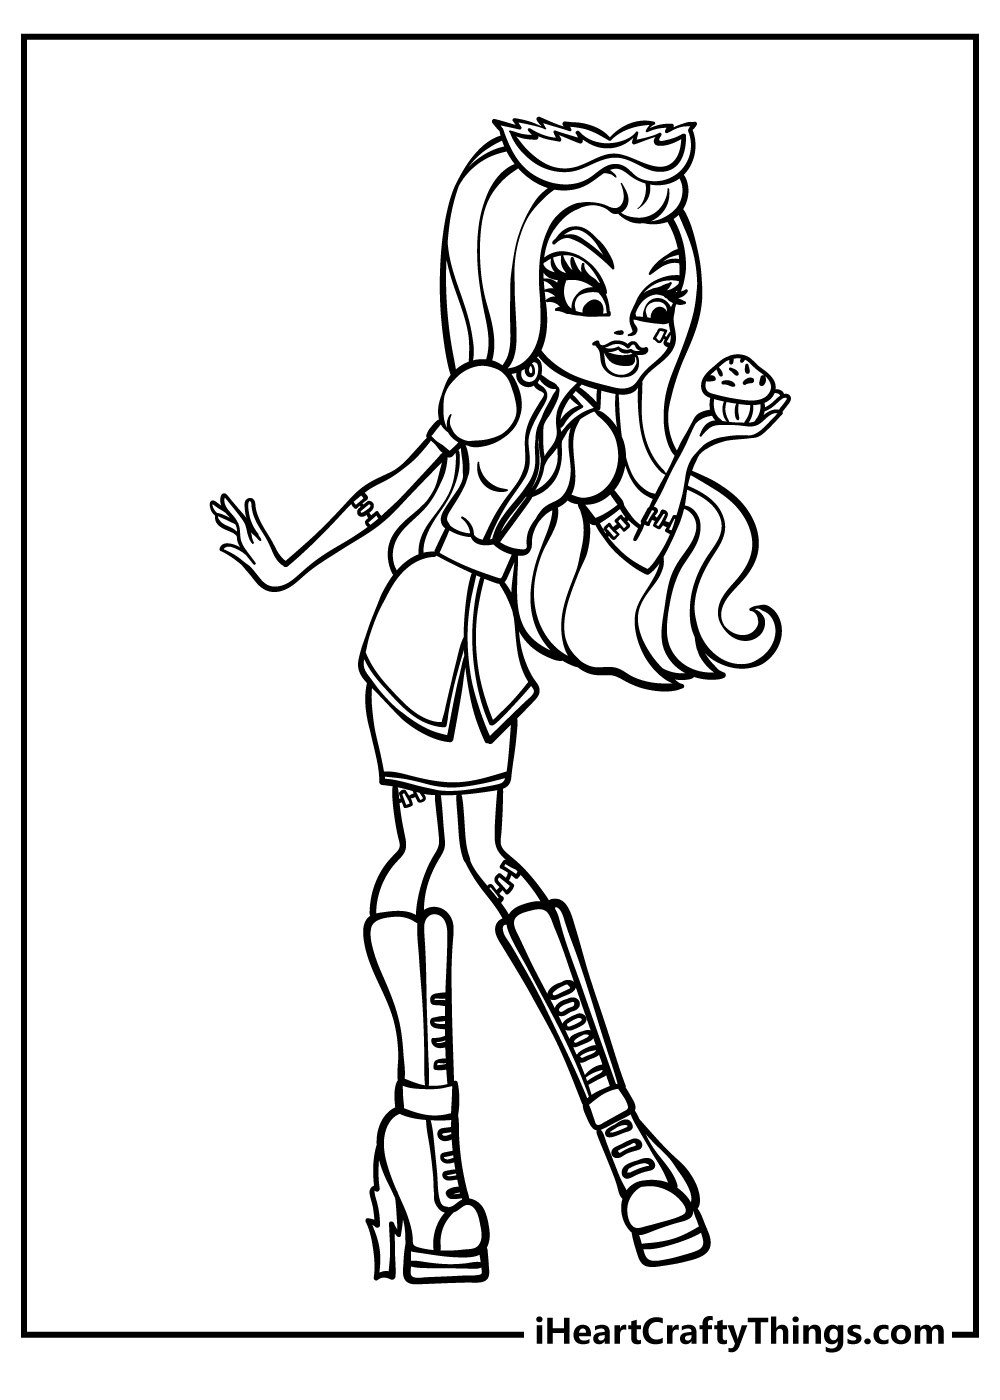 Monster High Coloring Pages for adults free printable